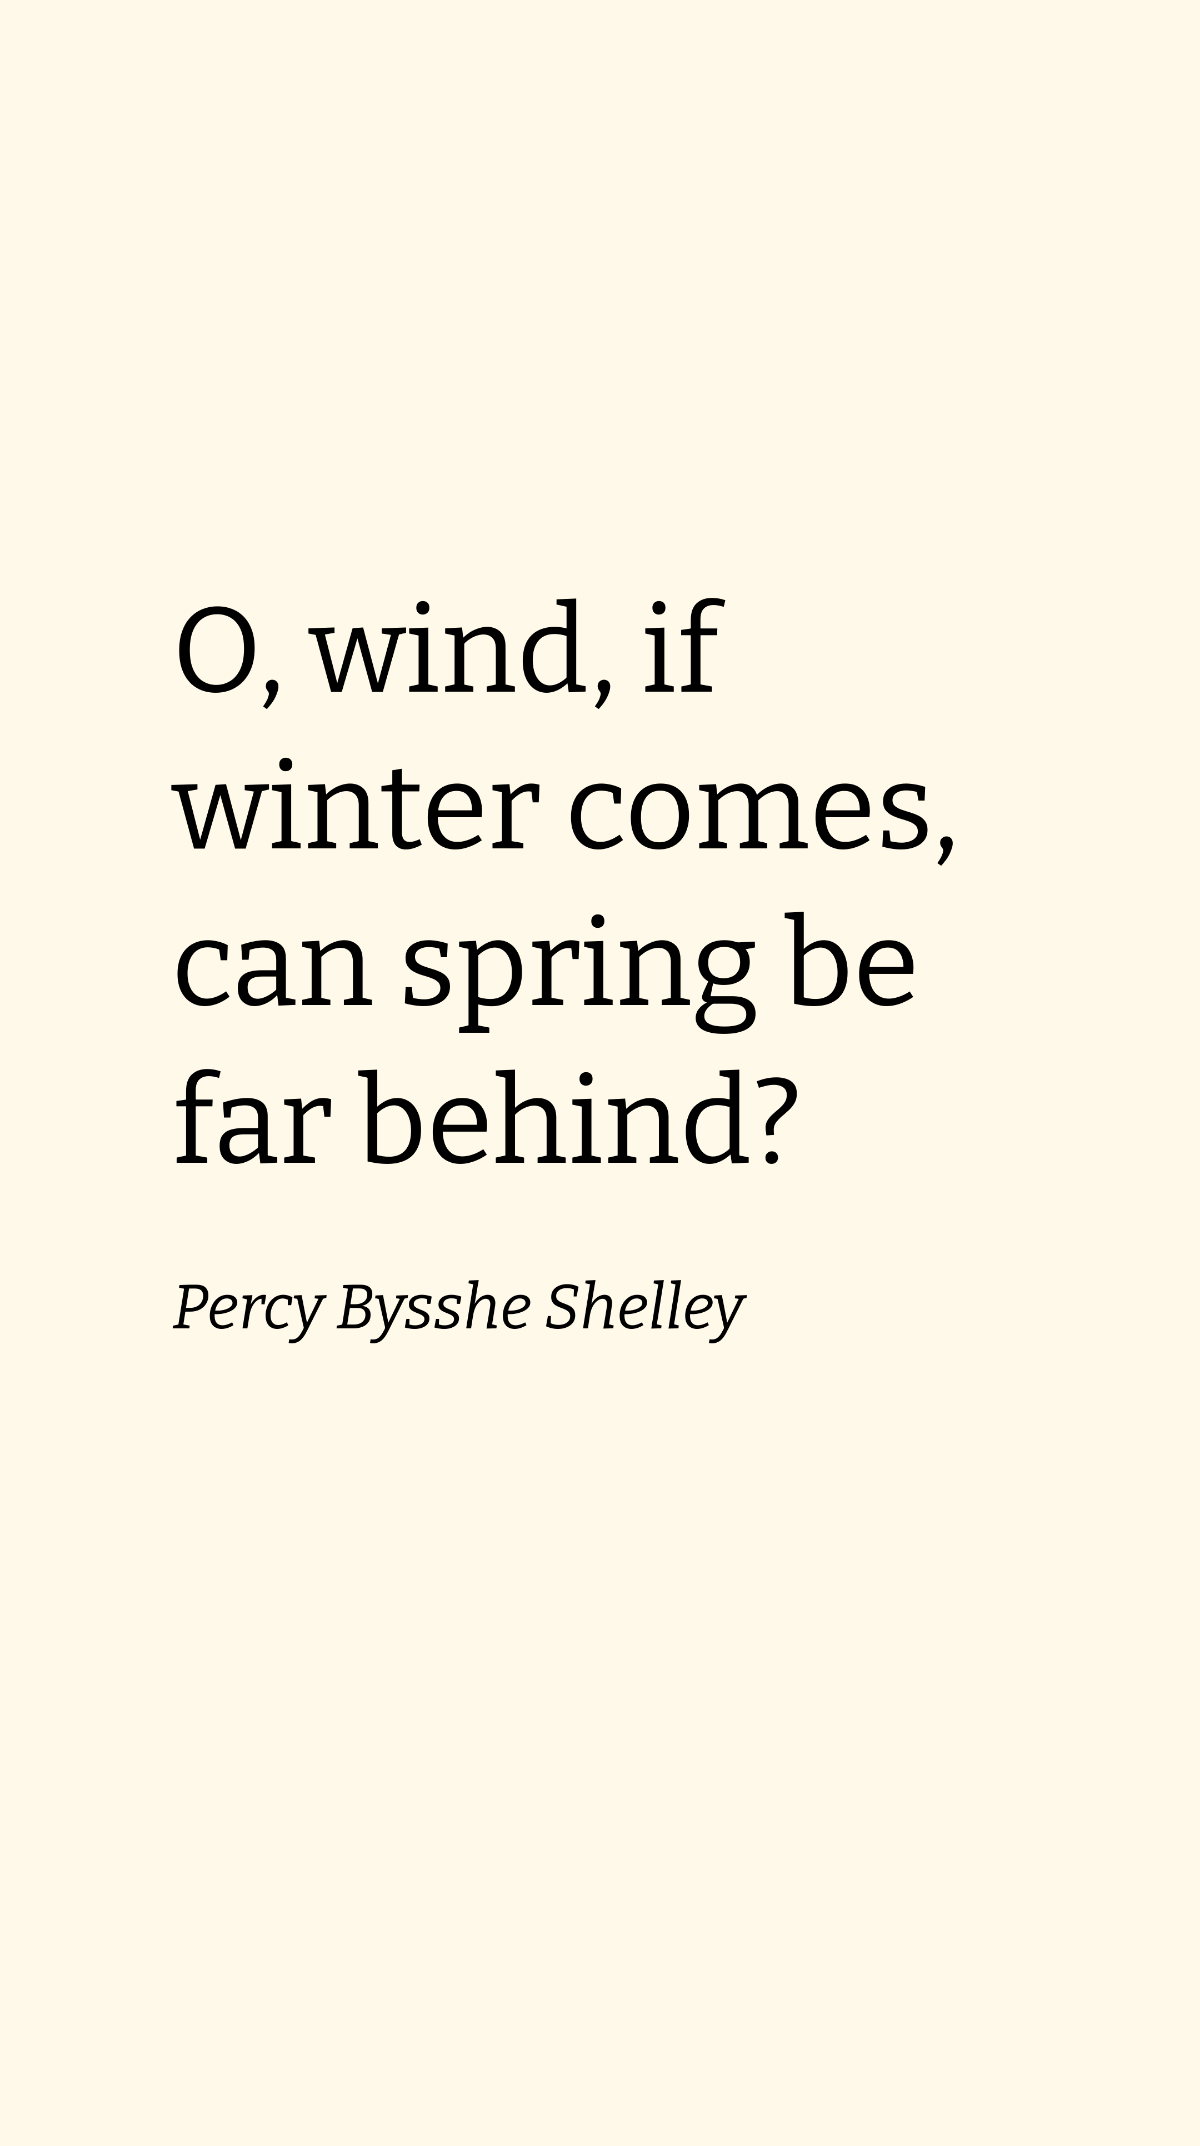 Percy Bysshe Shelley - O, wind, if winter comes, can spring be far behind?